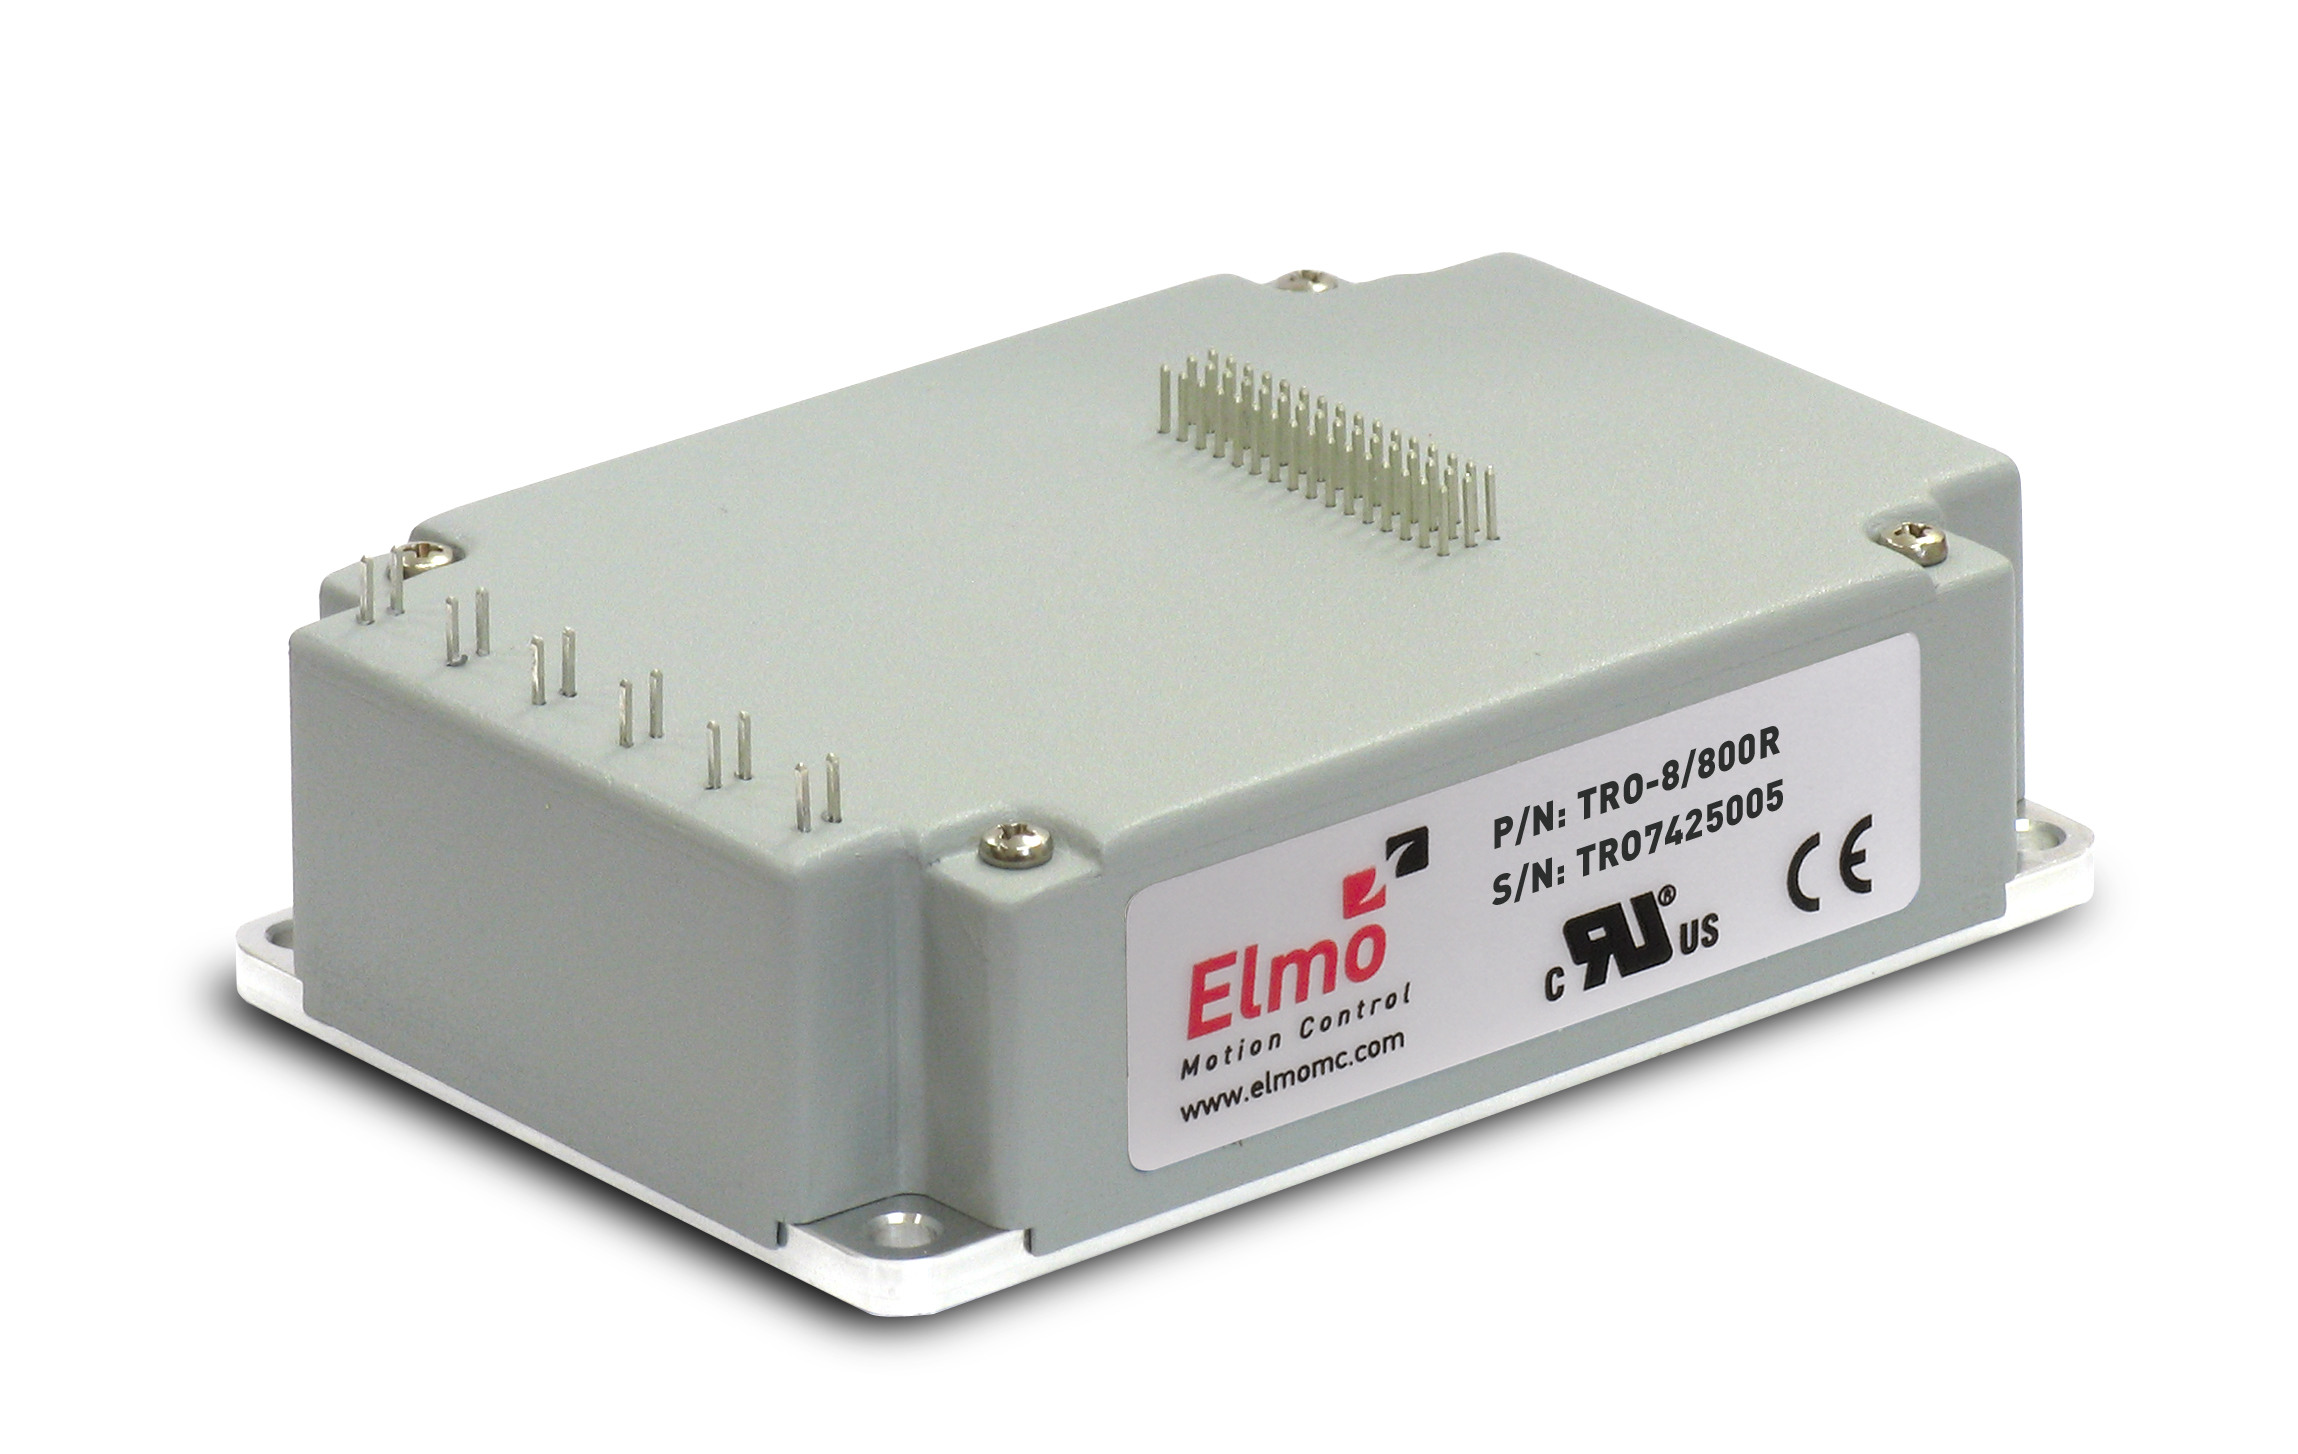 New Elmo Pcb-mounted Servo Drive Operates Directly From Mains Power Source, Delivering Up To 7kw Of Continuous Power.